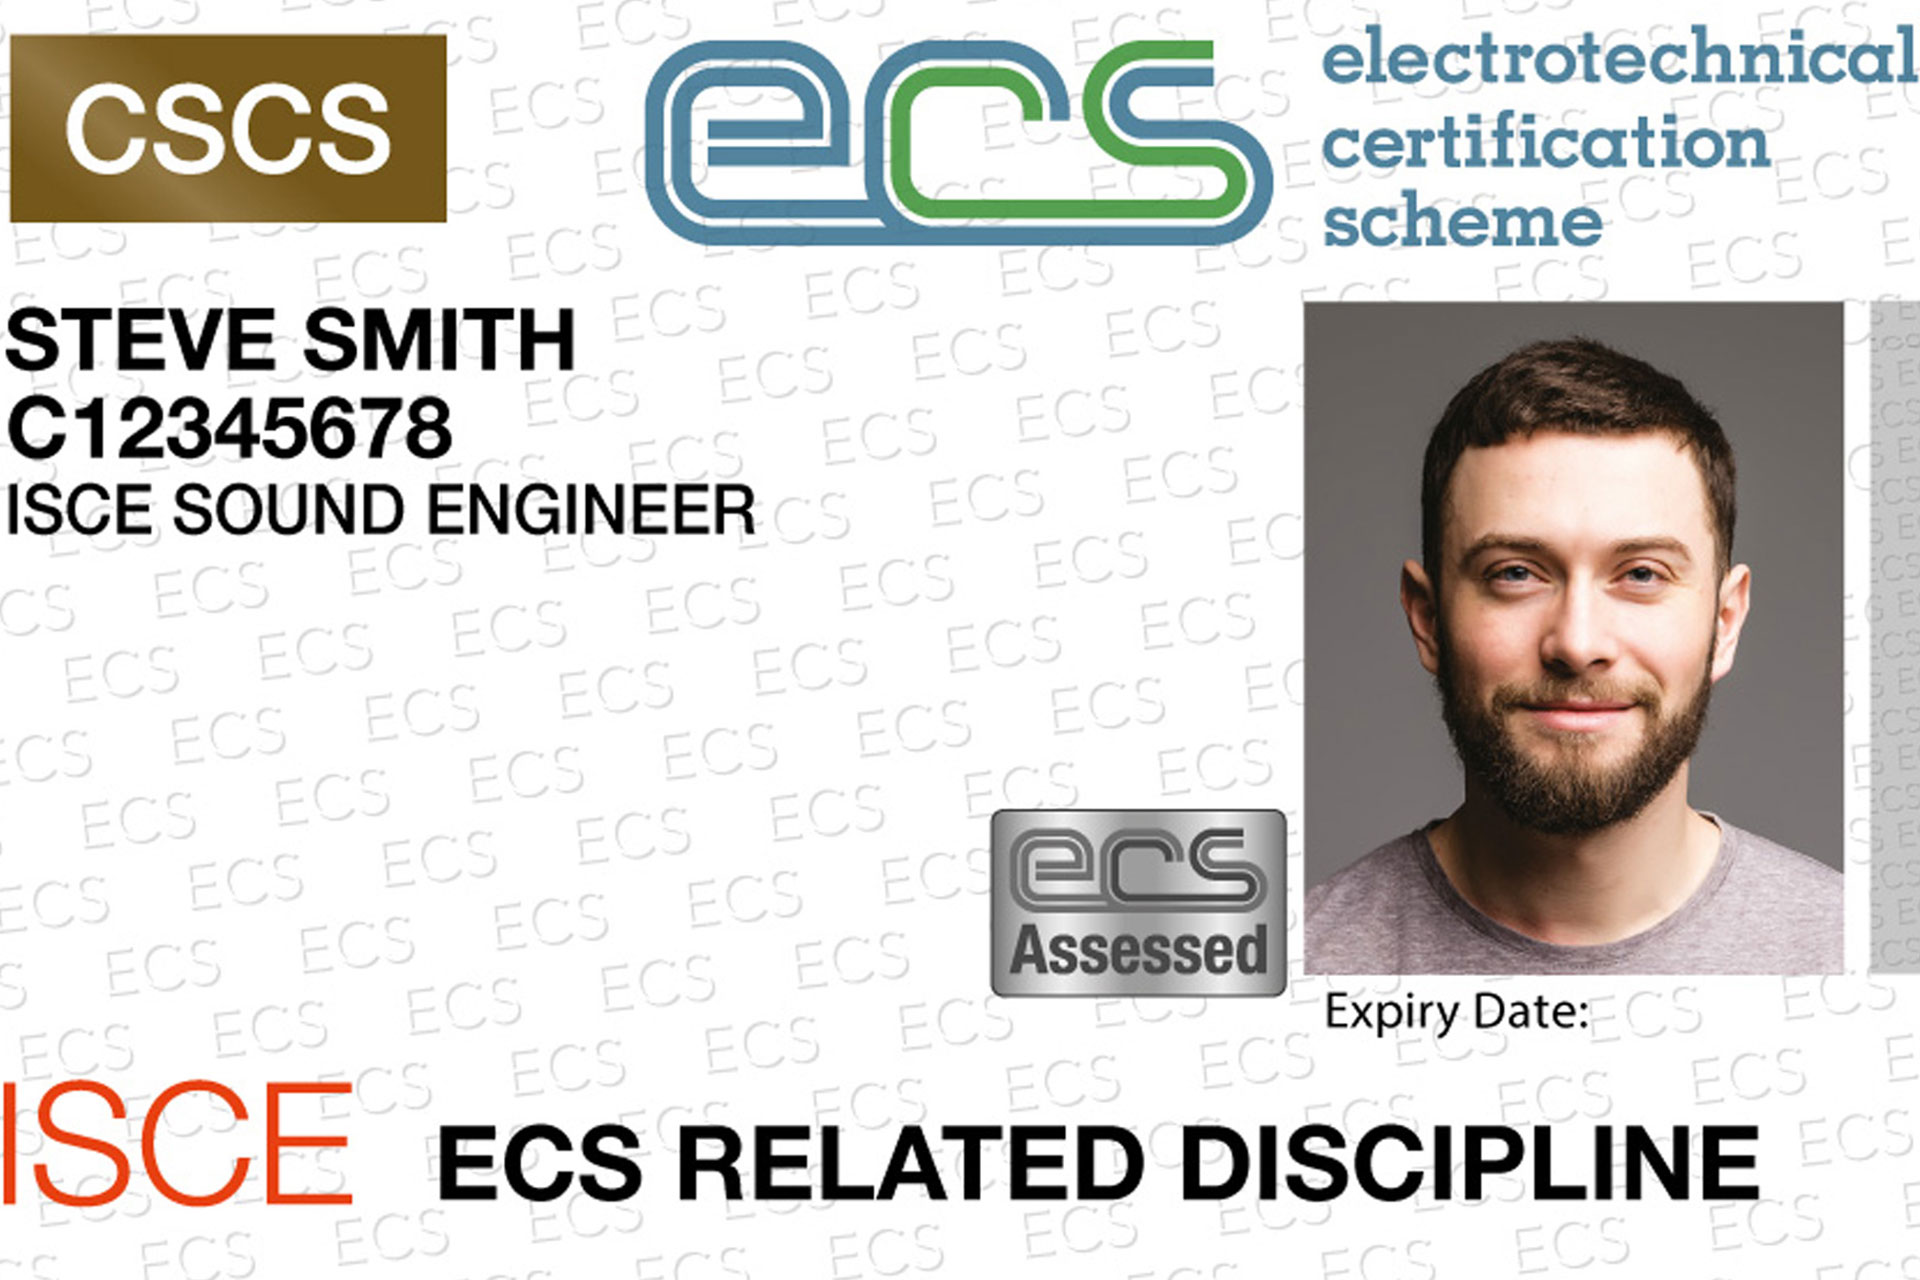 ISCE gains ECS accreditation status for sound engineers